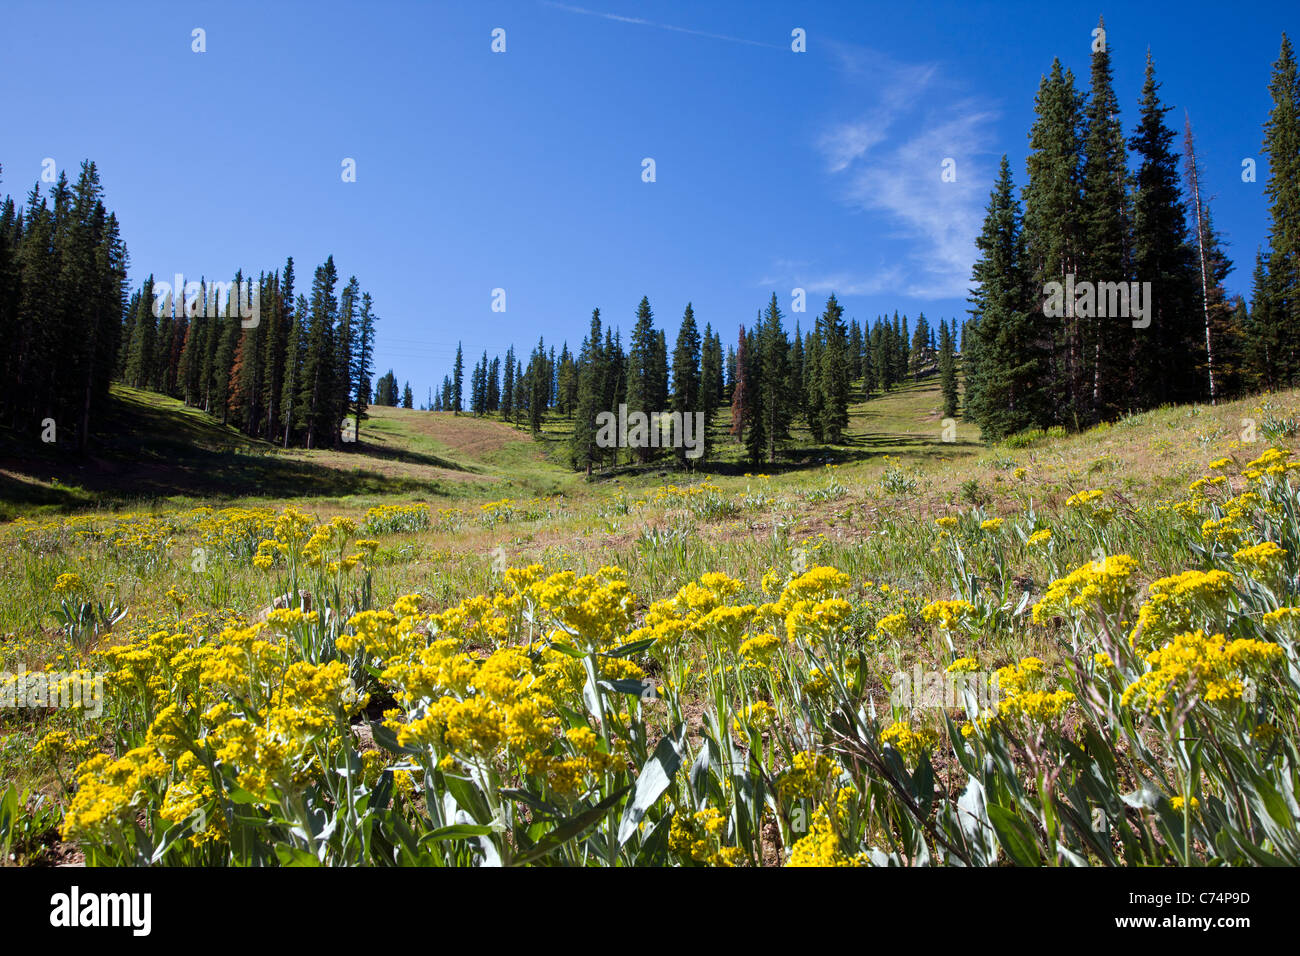 Summer view of Monarch Mountain ski area situated at 10,790' altitude in the Sawatch Range of the Rocky Mountains, Colorado, USA Stock Photo